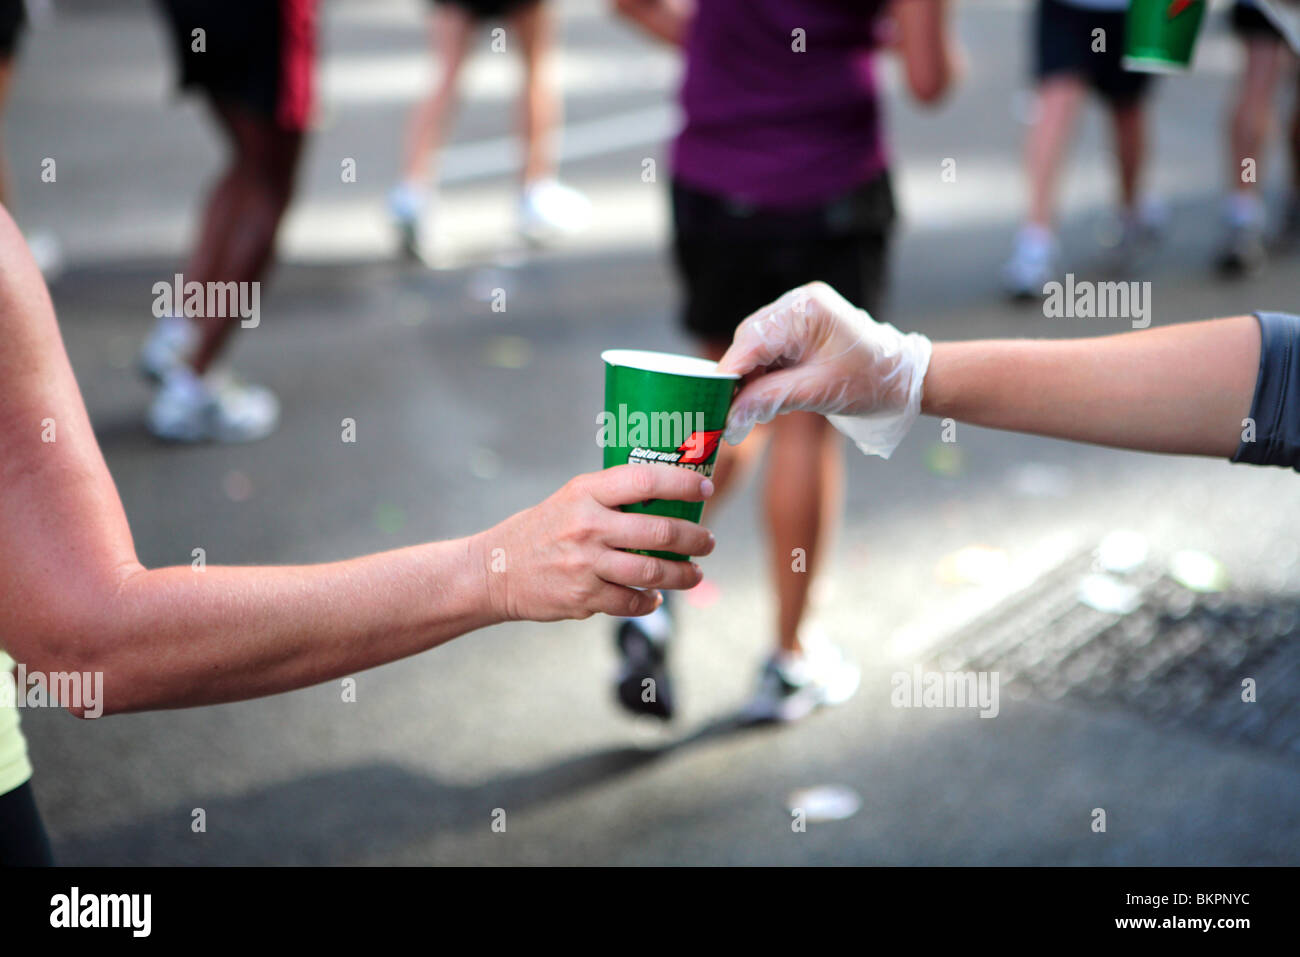 CHICAGO MARATHON ; ONE OF THE CHICAGO MARATHON STAFF MEMBERS HANDING A CUP OF ENERGY DRINK TO A RUNNER Stock Photo